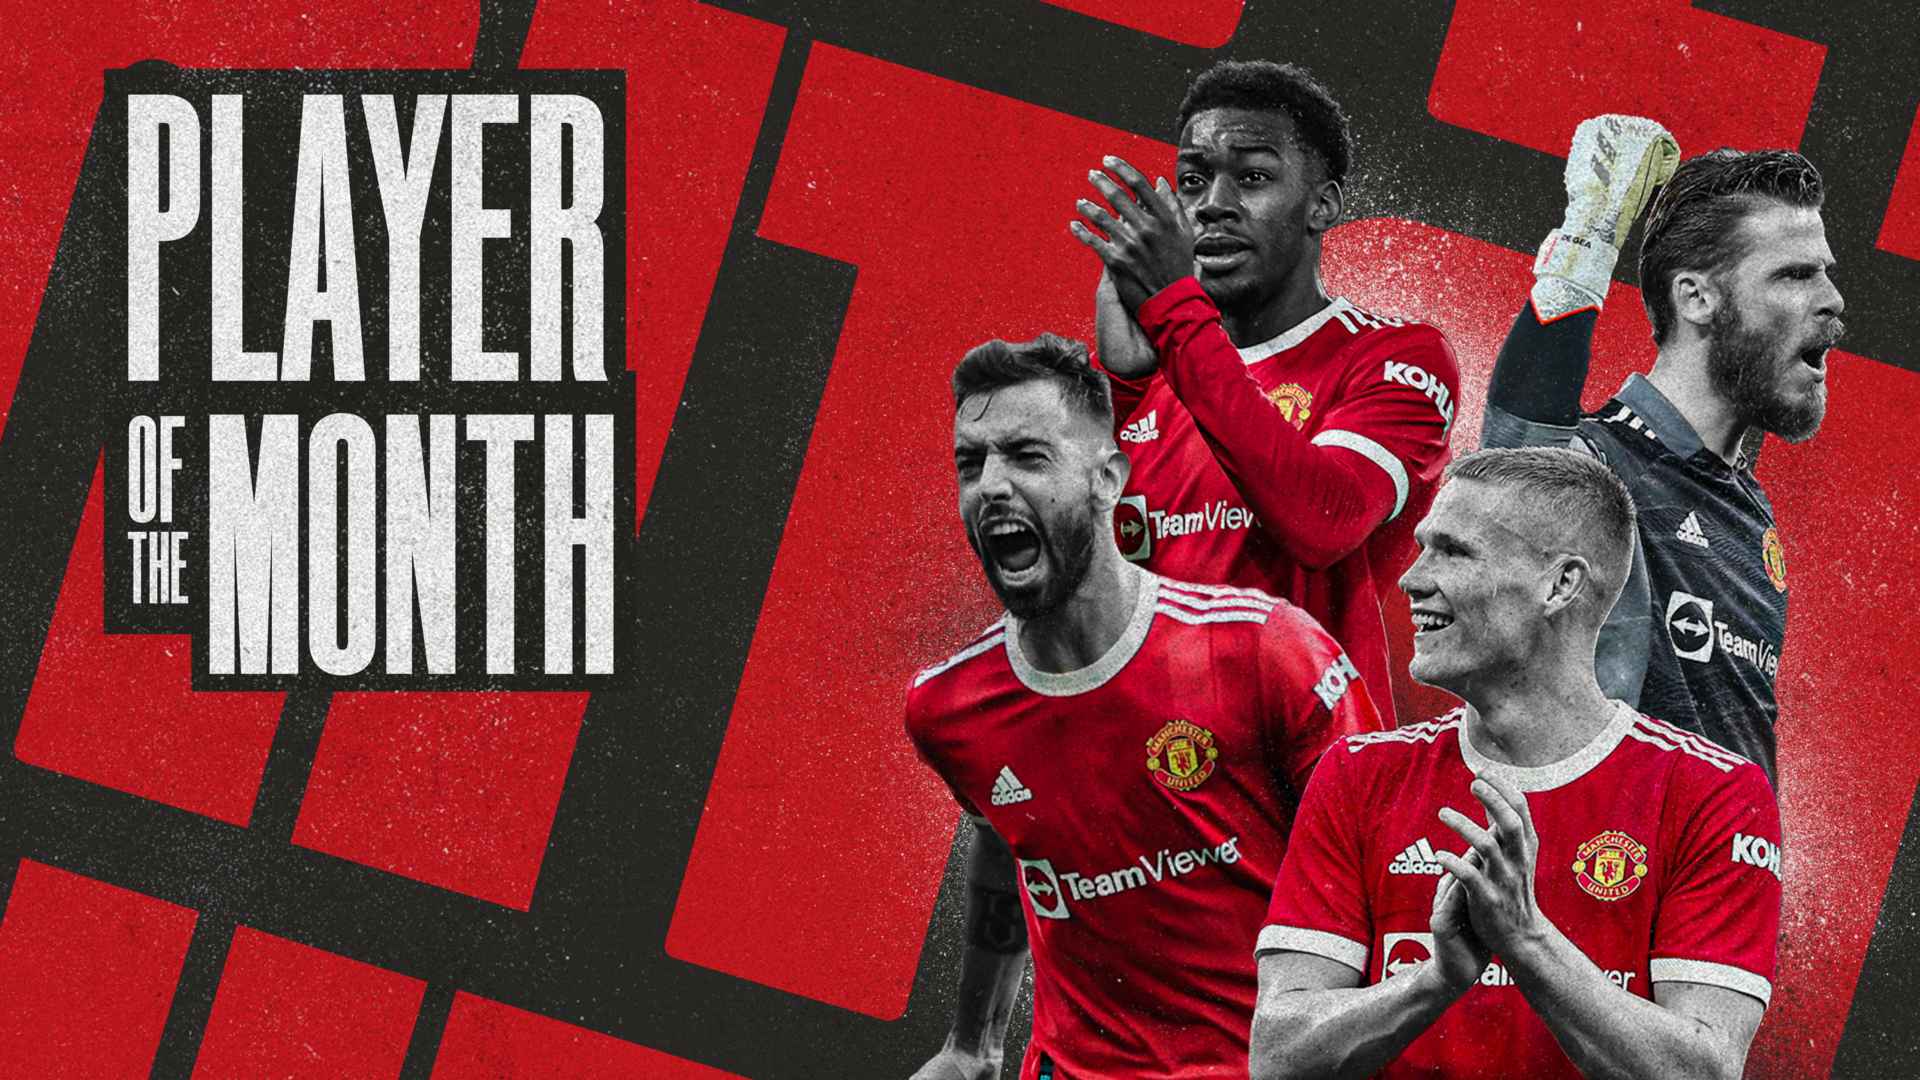 Vote for Manchester United Player of the Month